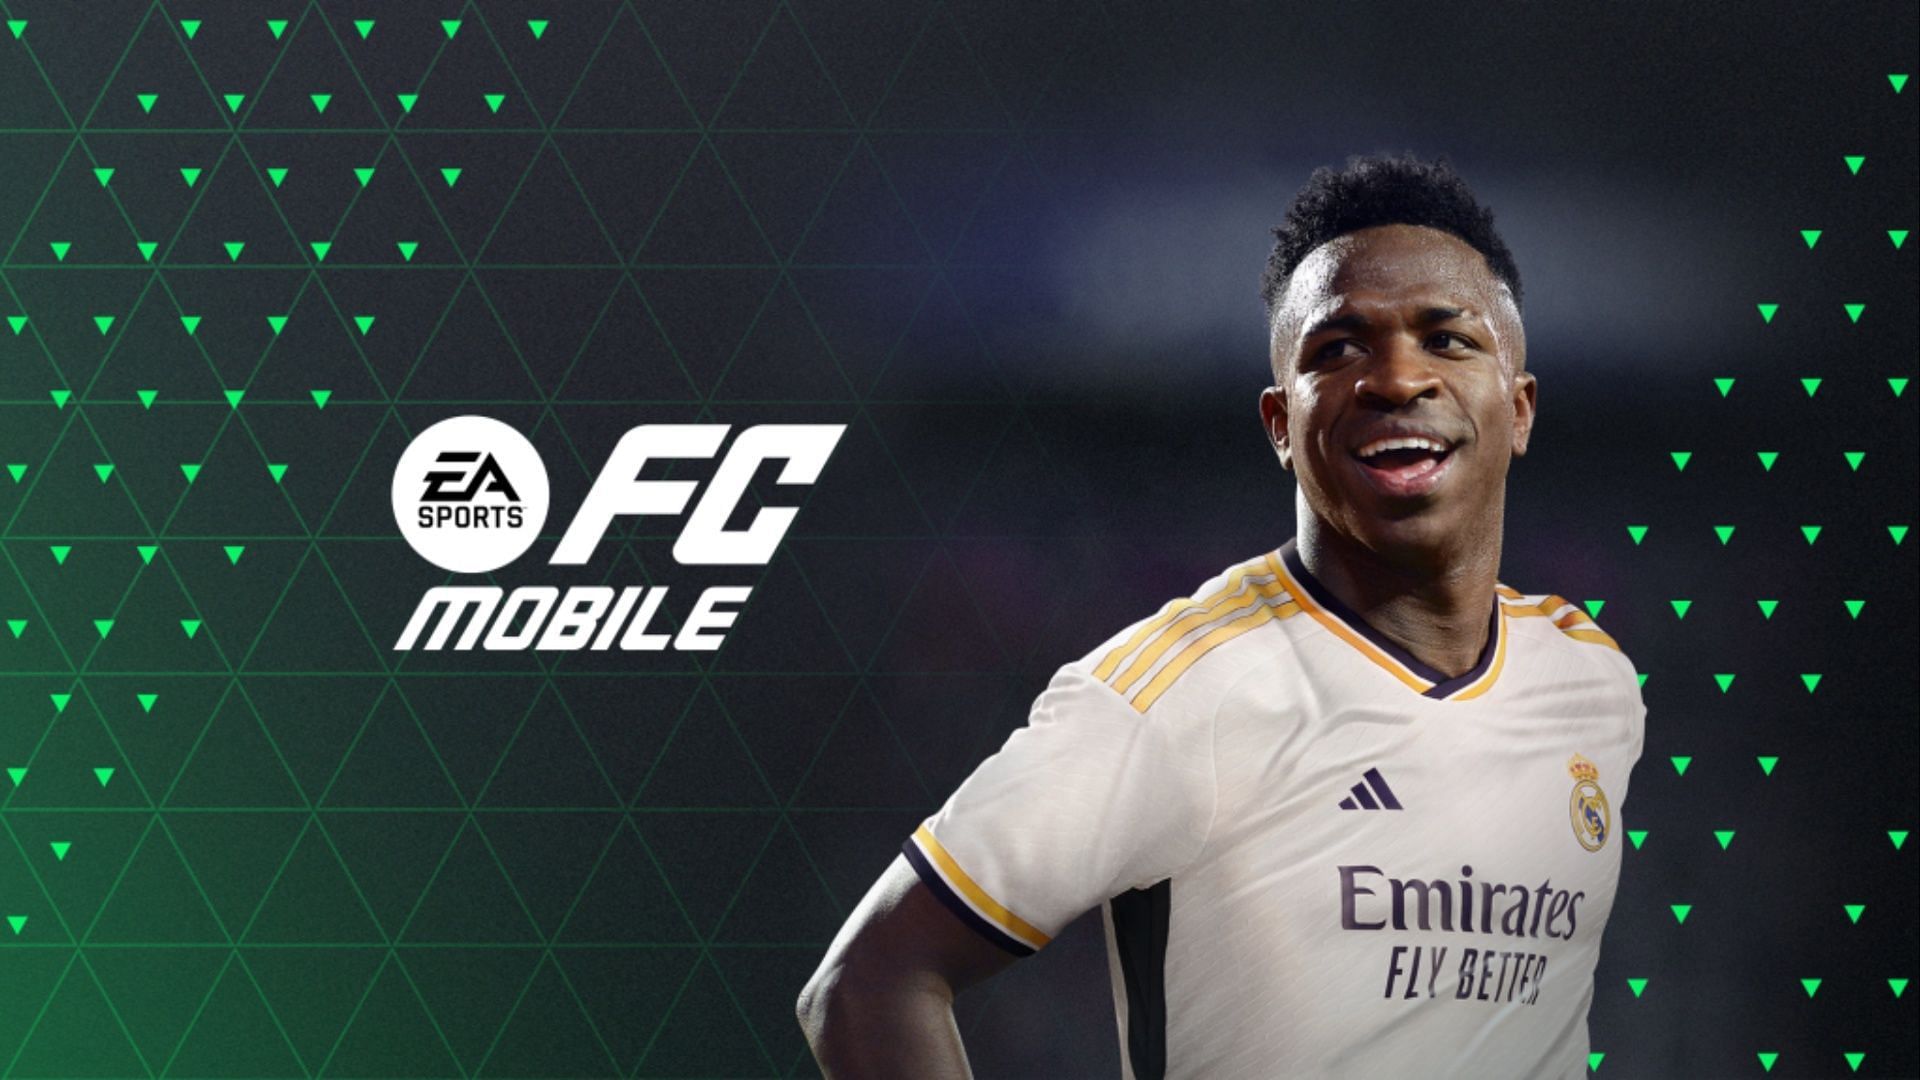 FIFA 21 Mobile: Device Coverage Specifications Revealed